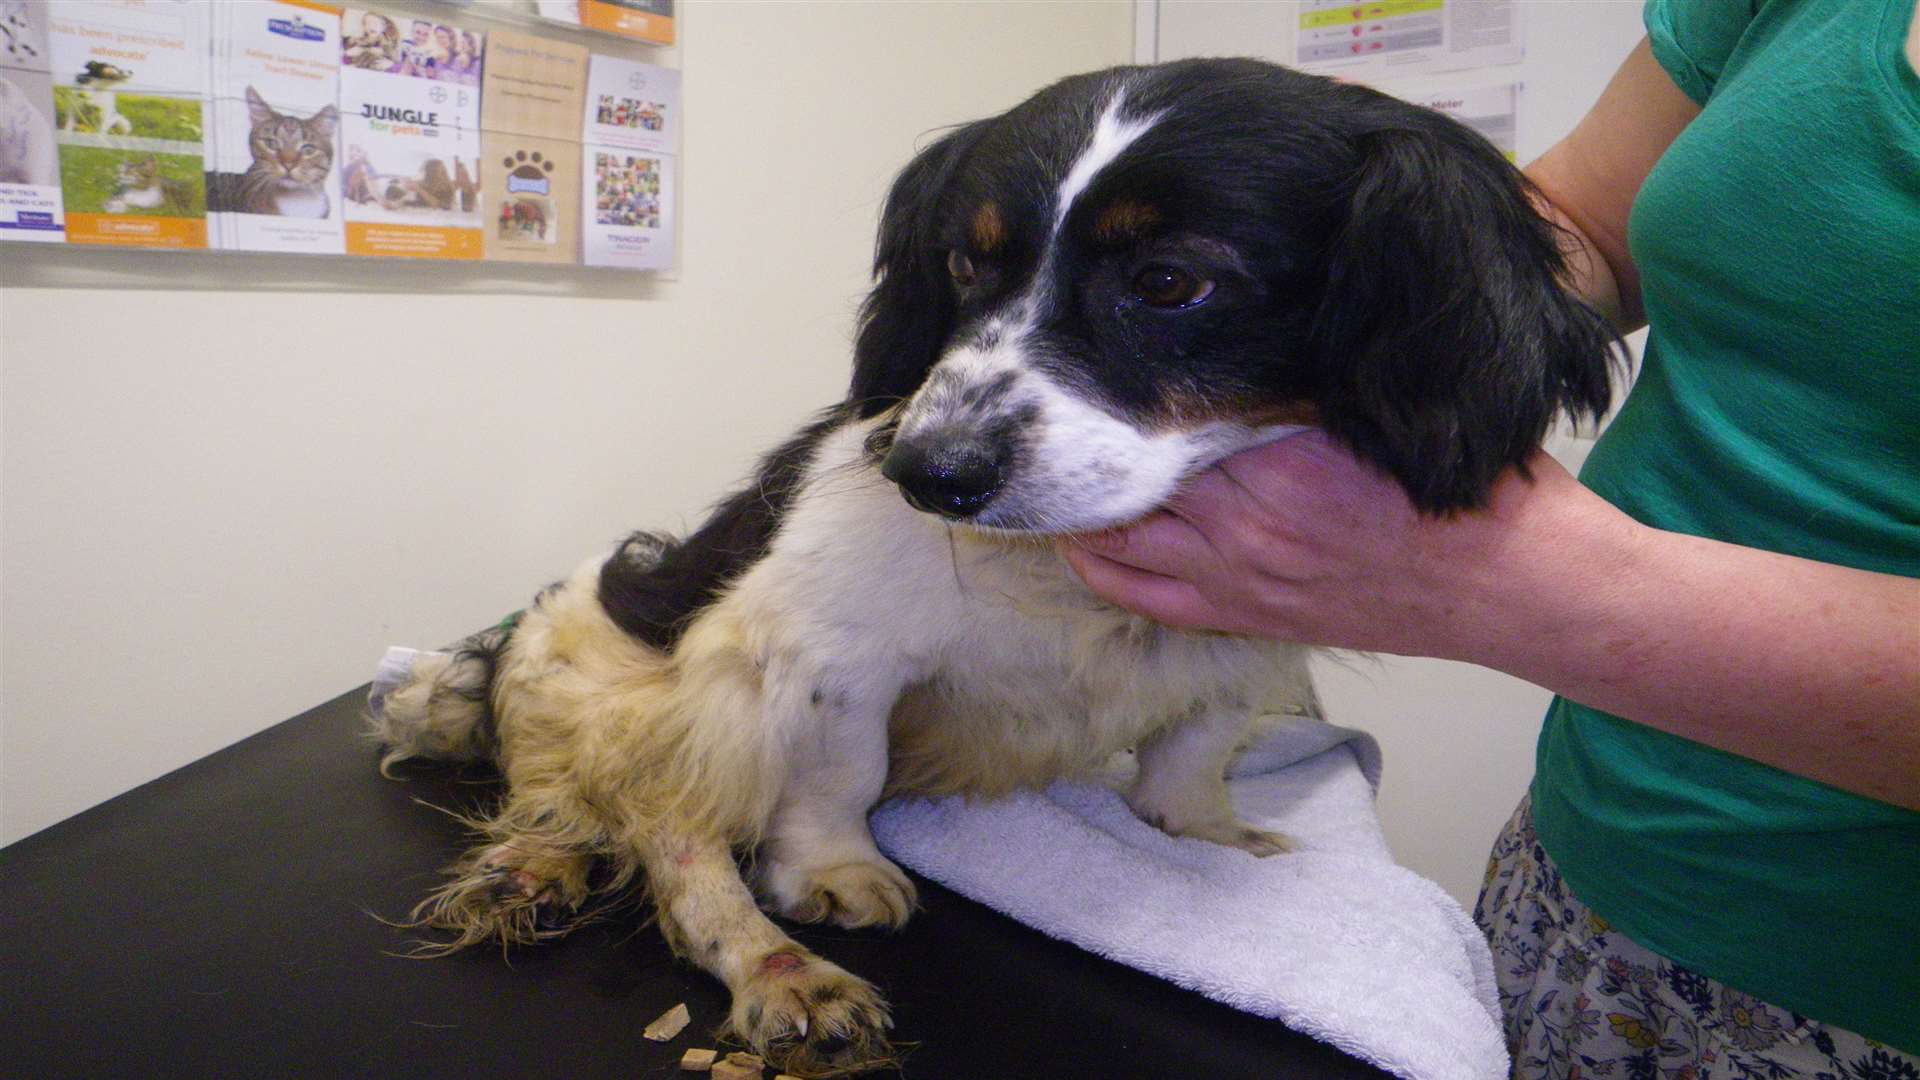 The spaniel type dog was found after a member of the public saw a car acting suspiciously in the area and, after it drove off, they went to investigate.